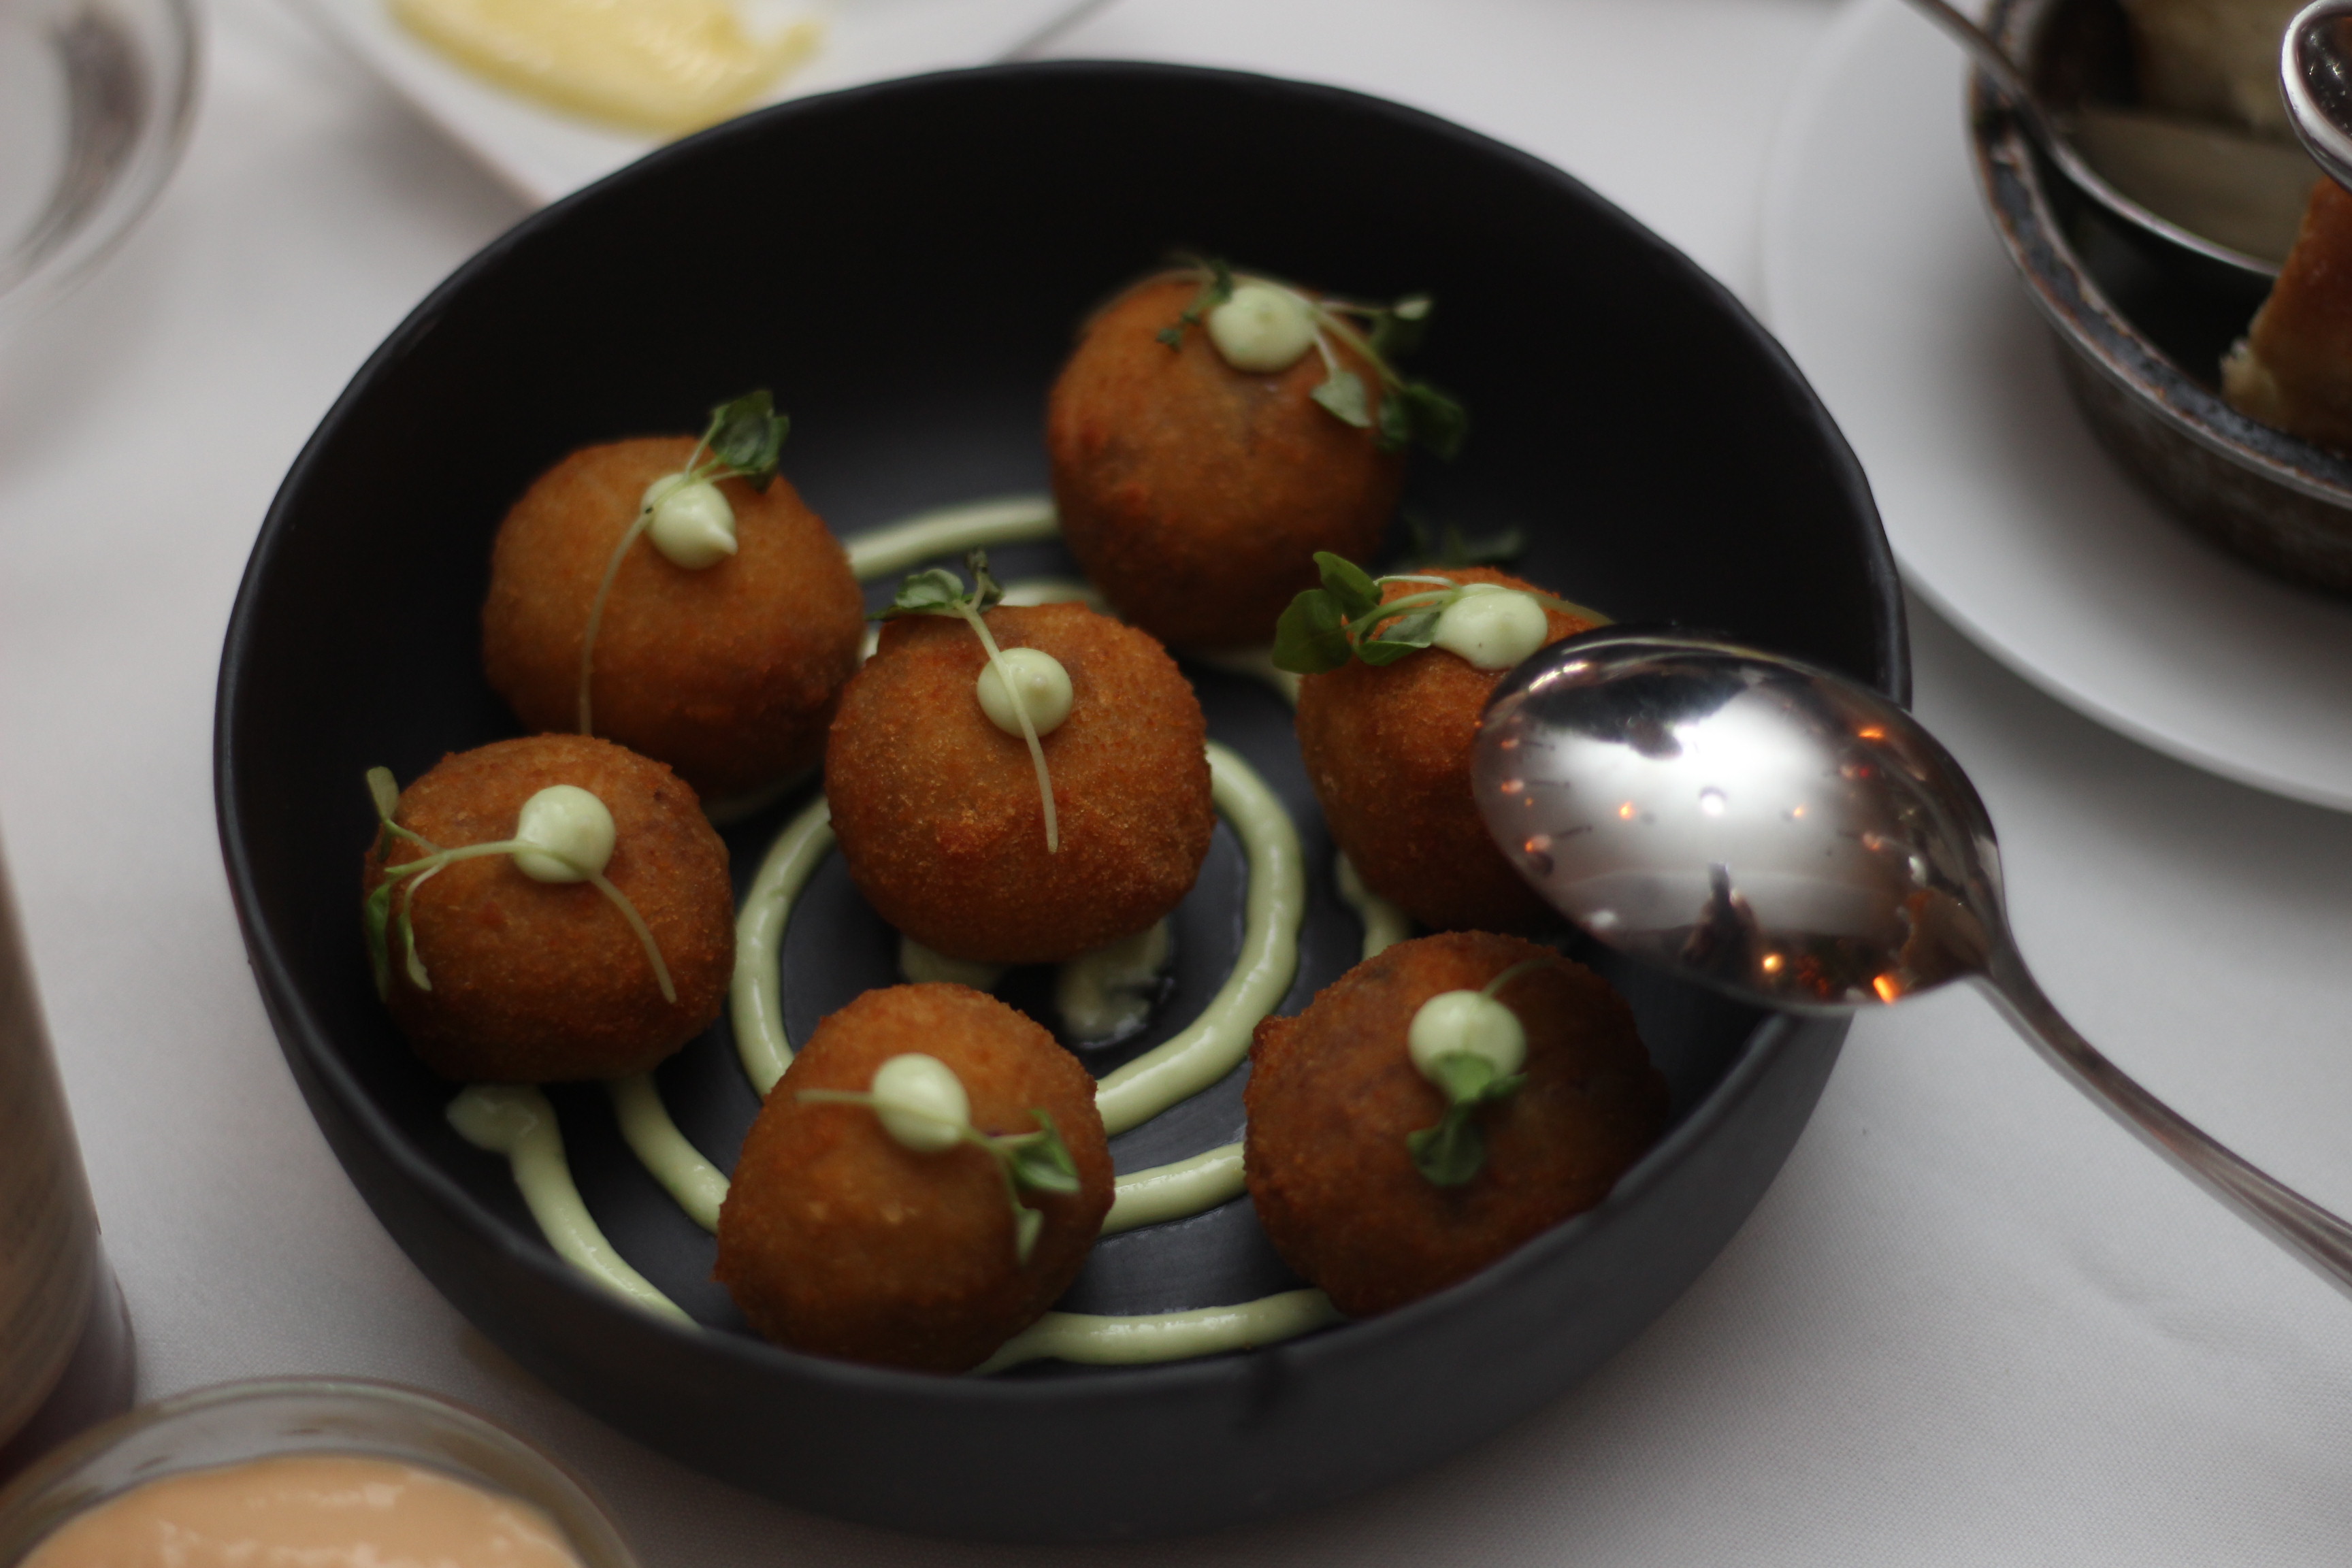 Wagyu Beef Croquettes at Quality Meats Miami